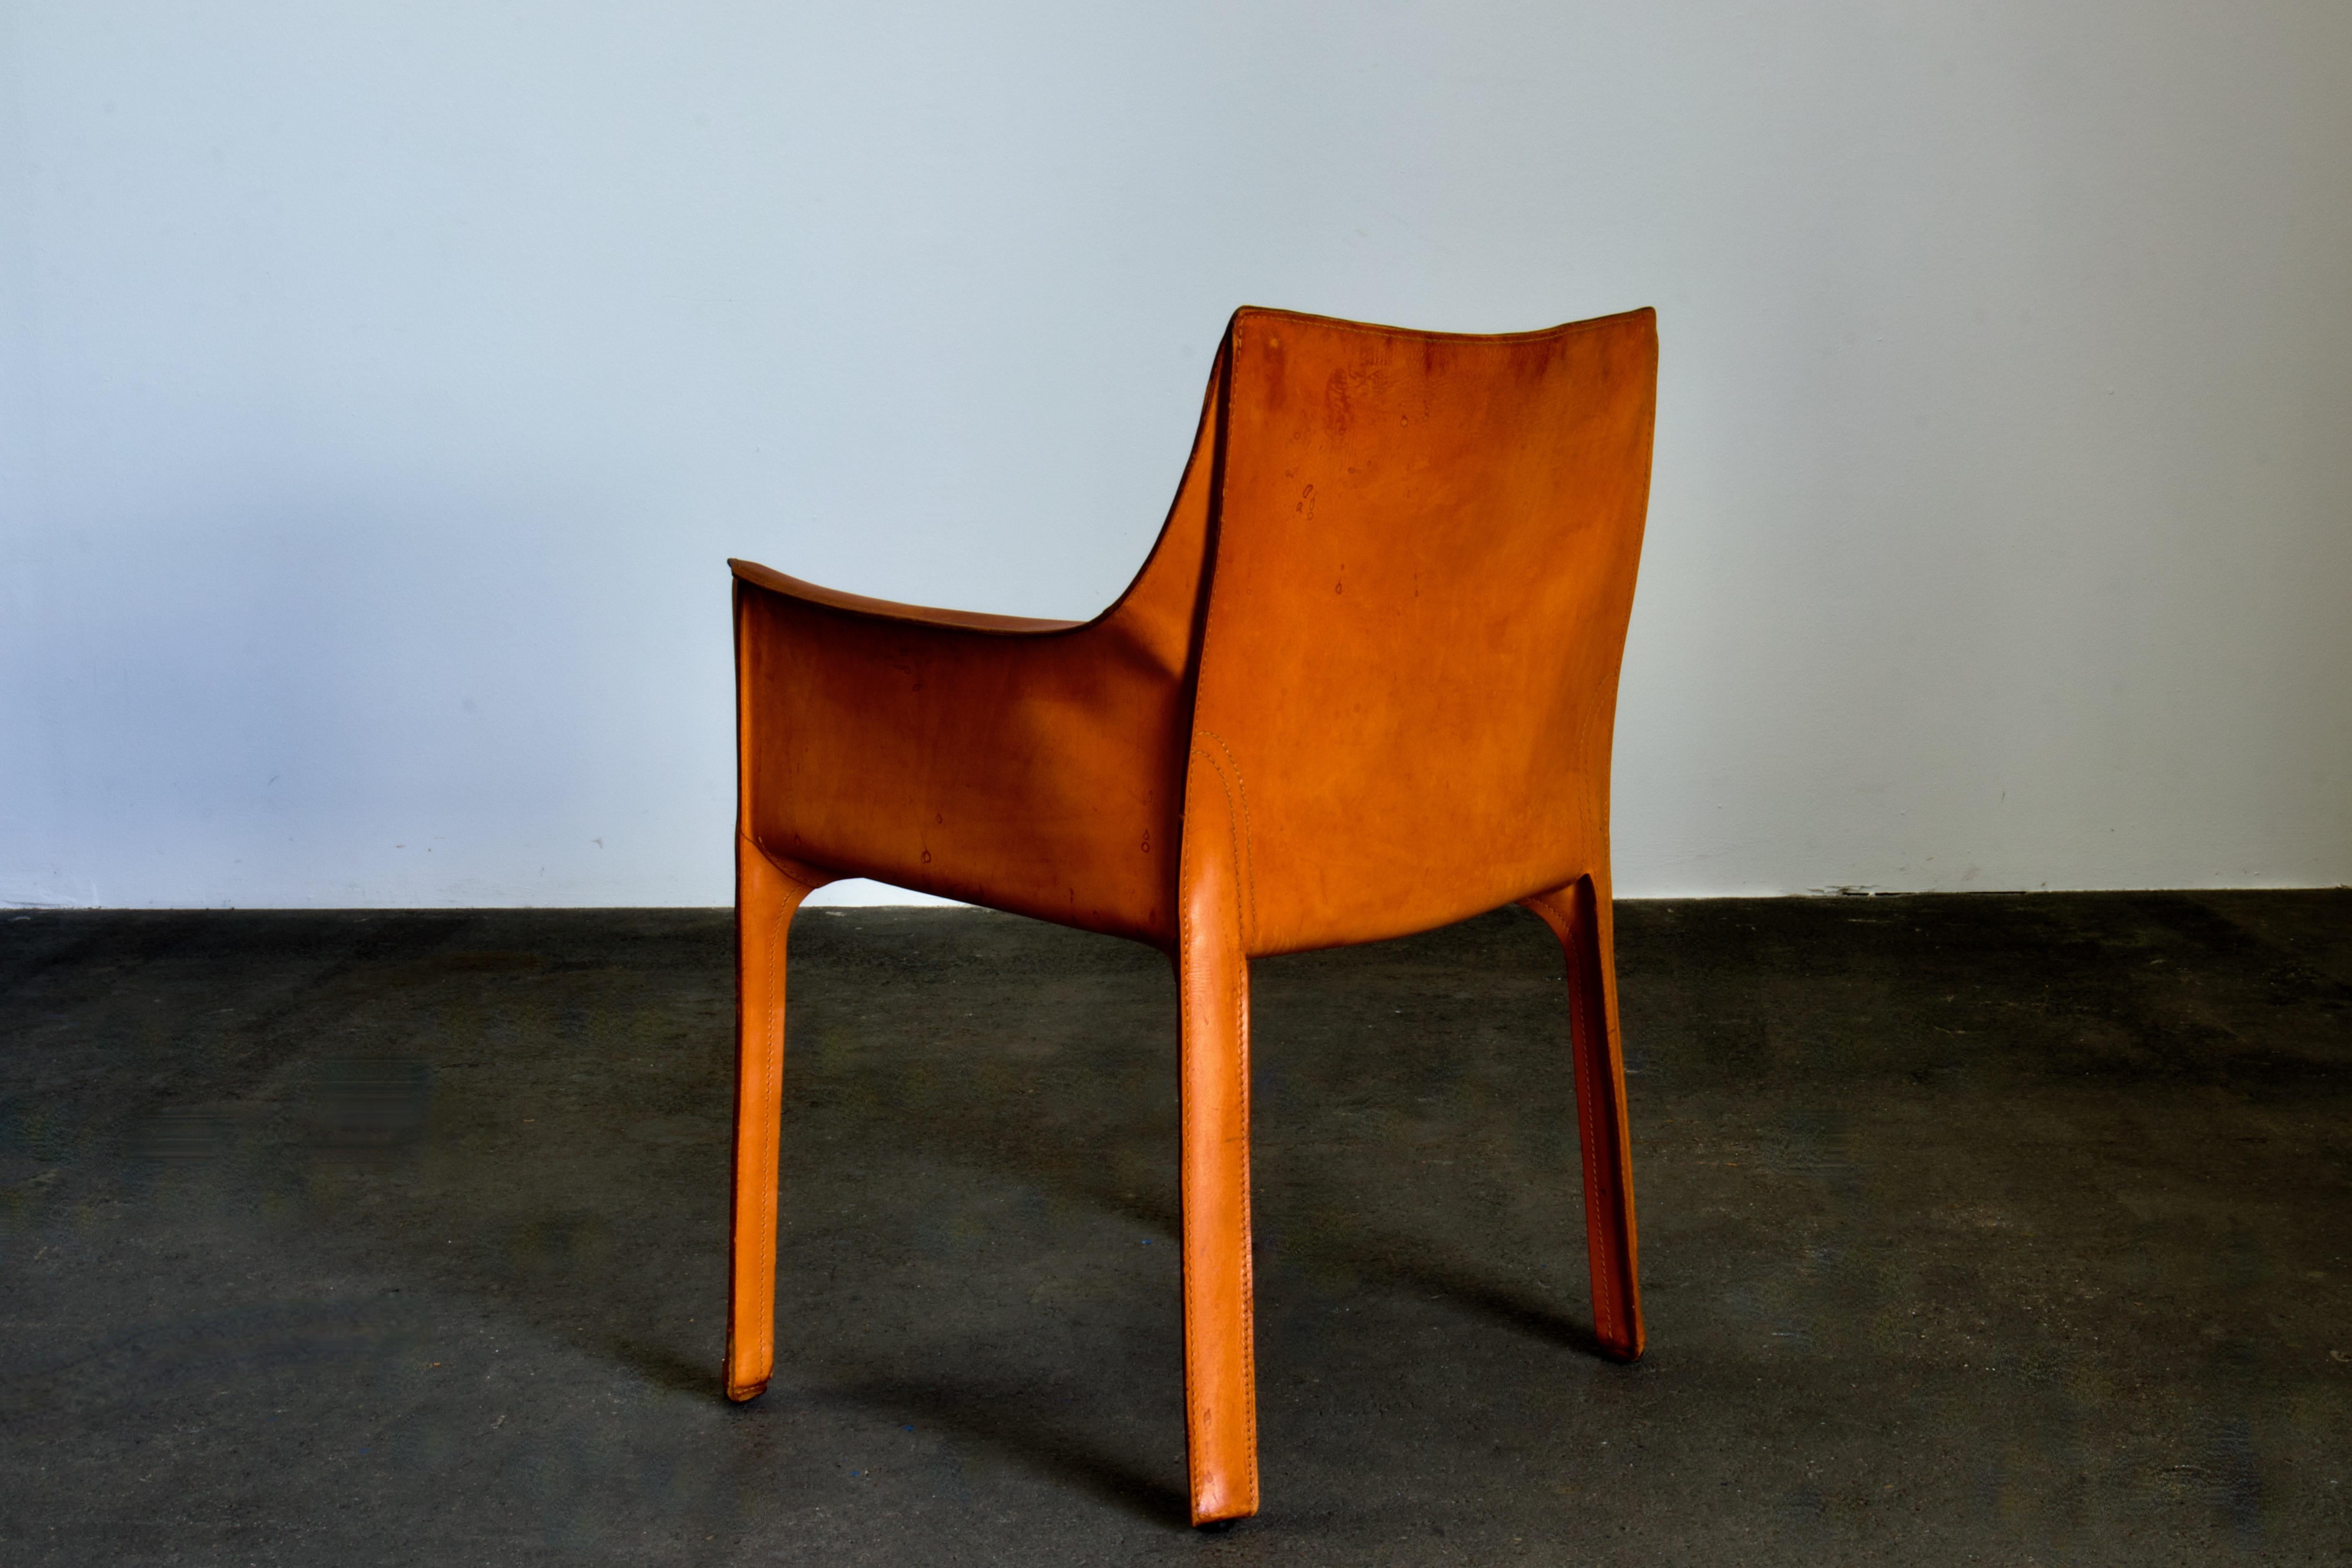 20th Century Patinated Bellini CAB 413 Armchair in Vintage Cognac Saddle Leather for Cassina